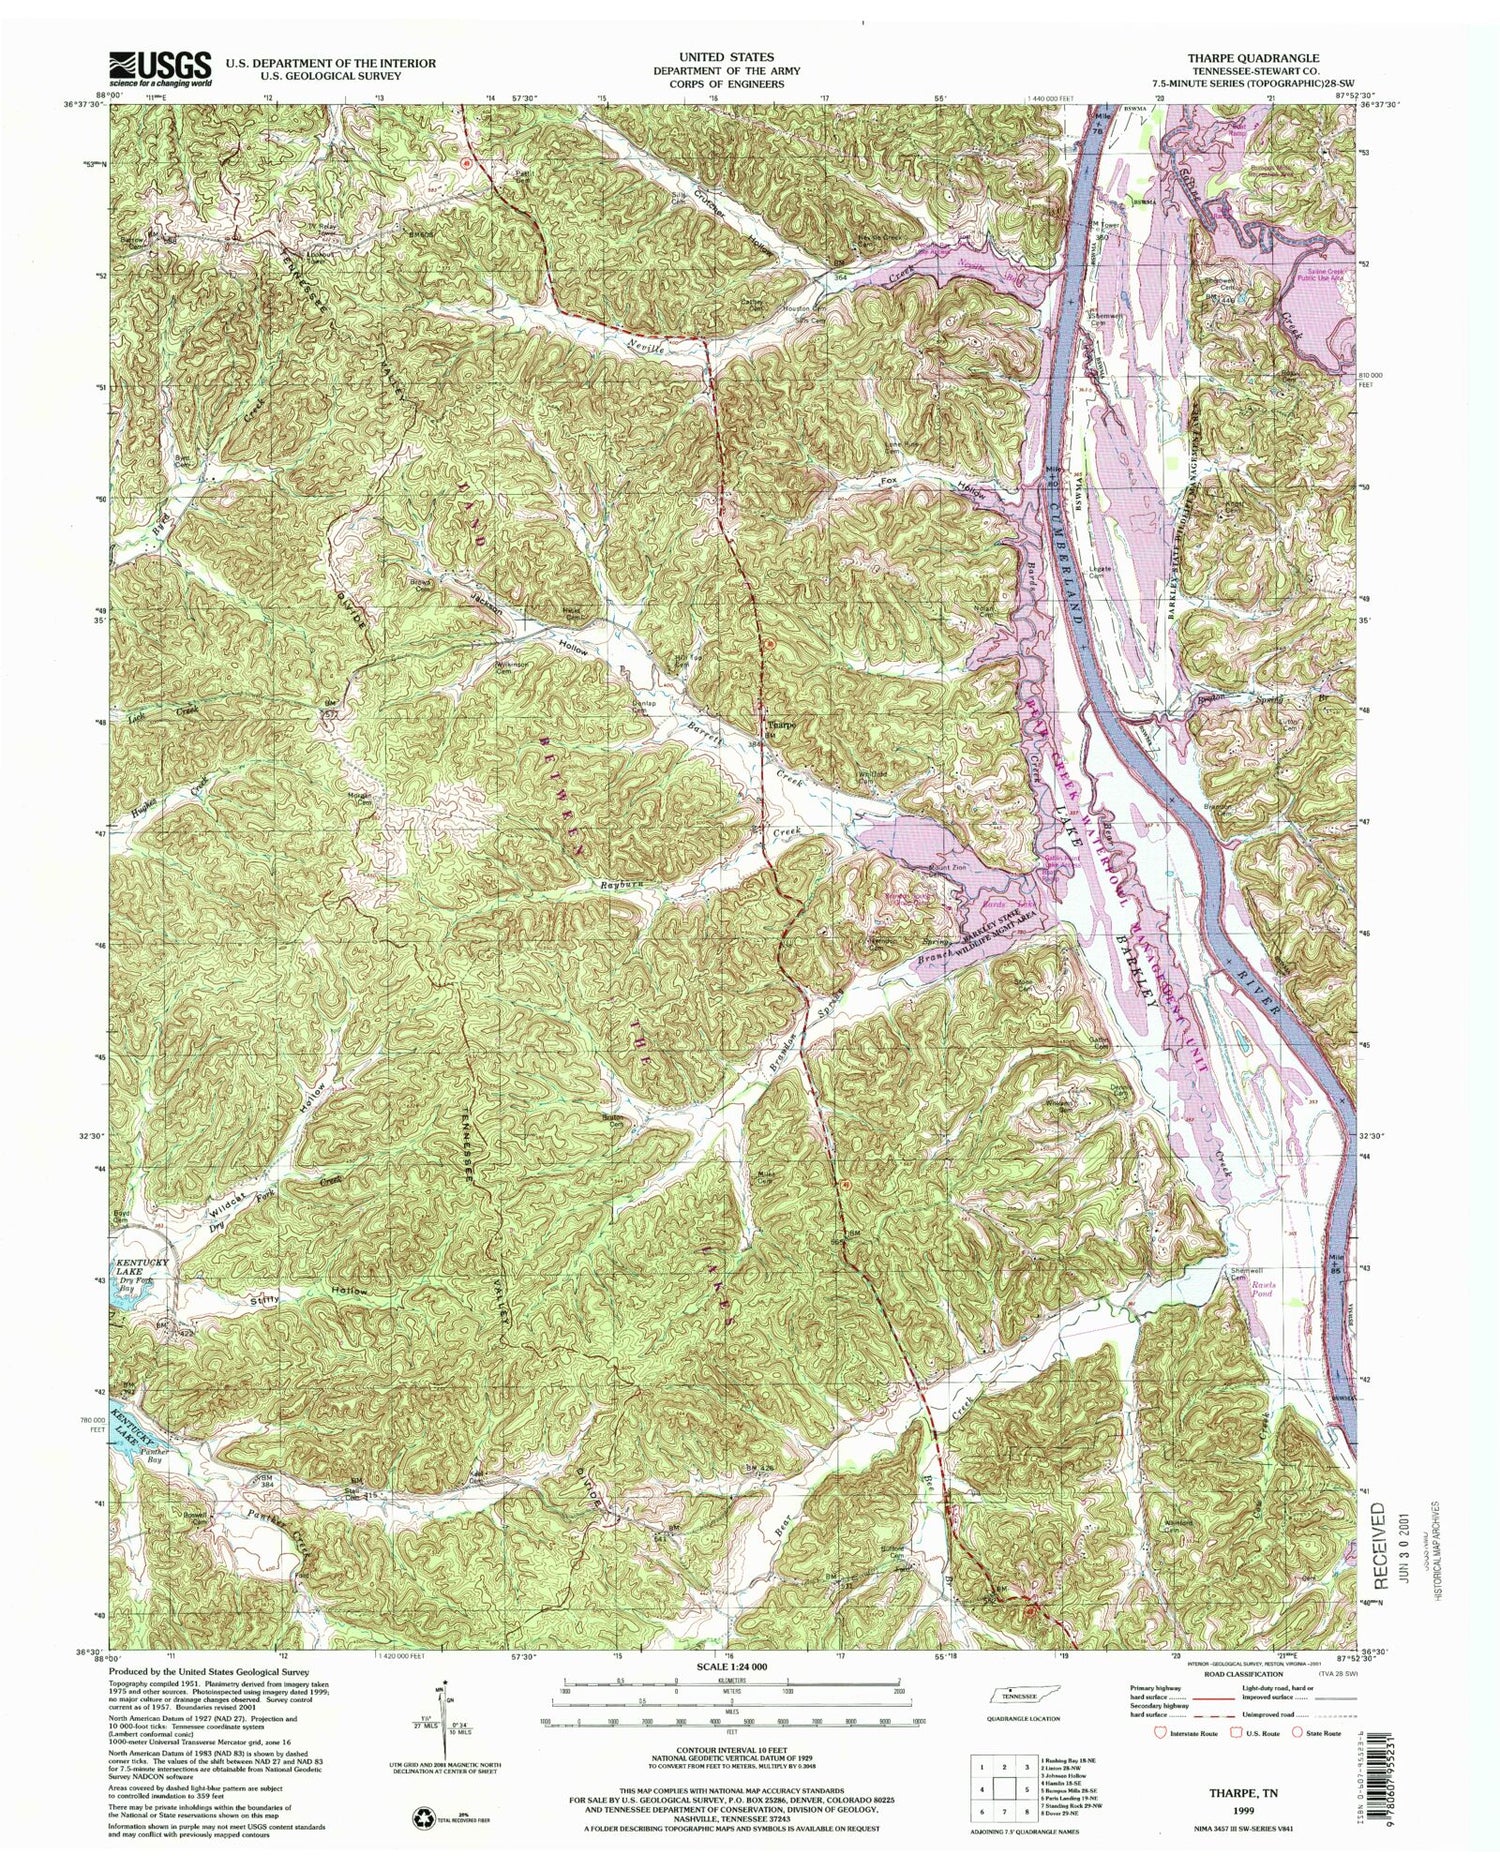 USGS Classic Tharpe Tennessee 7.5'x7.5' Topo Map Image